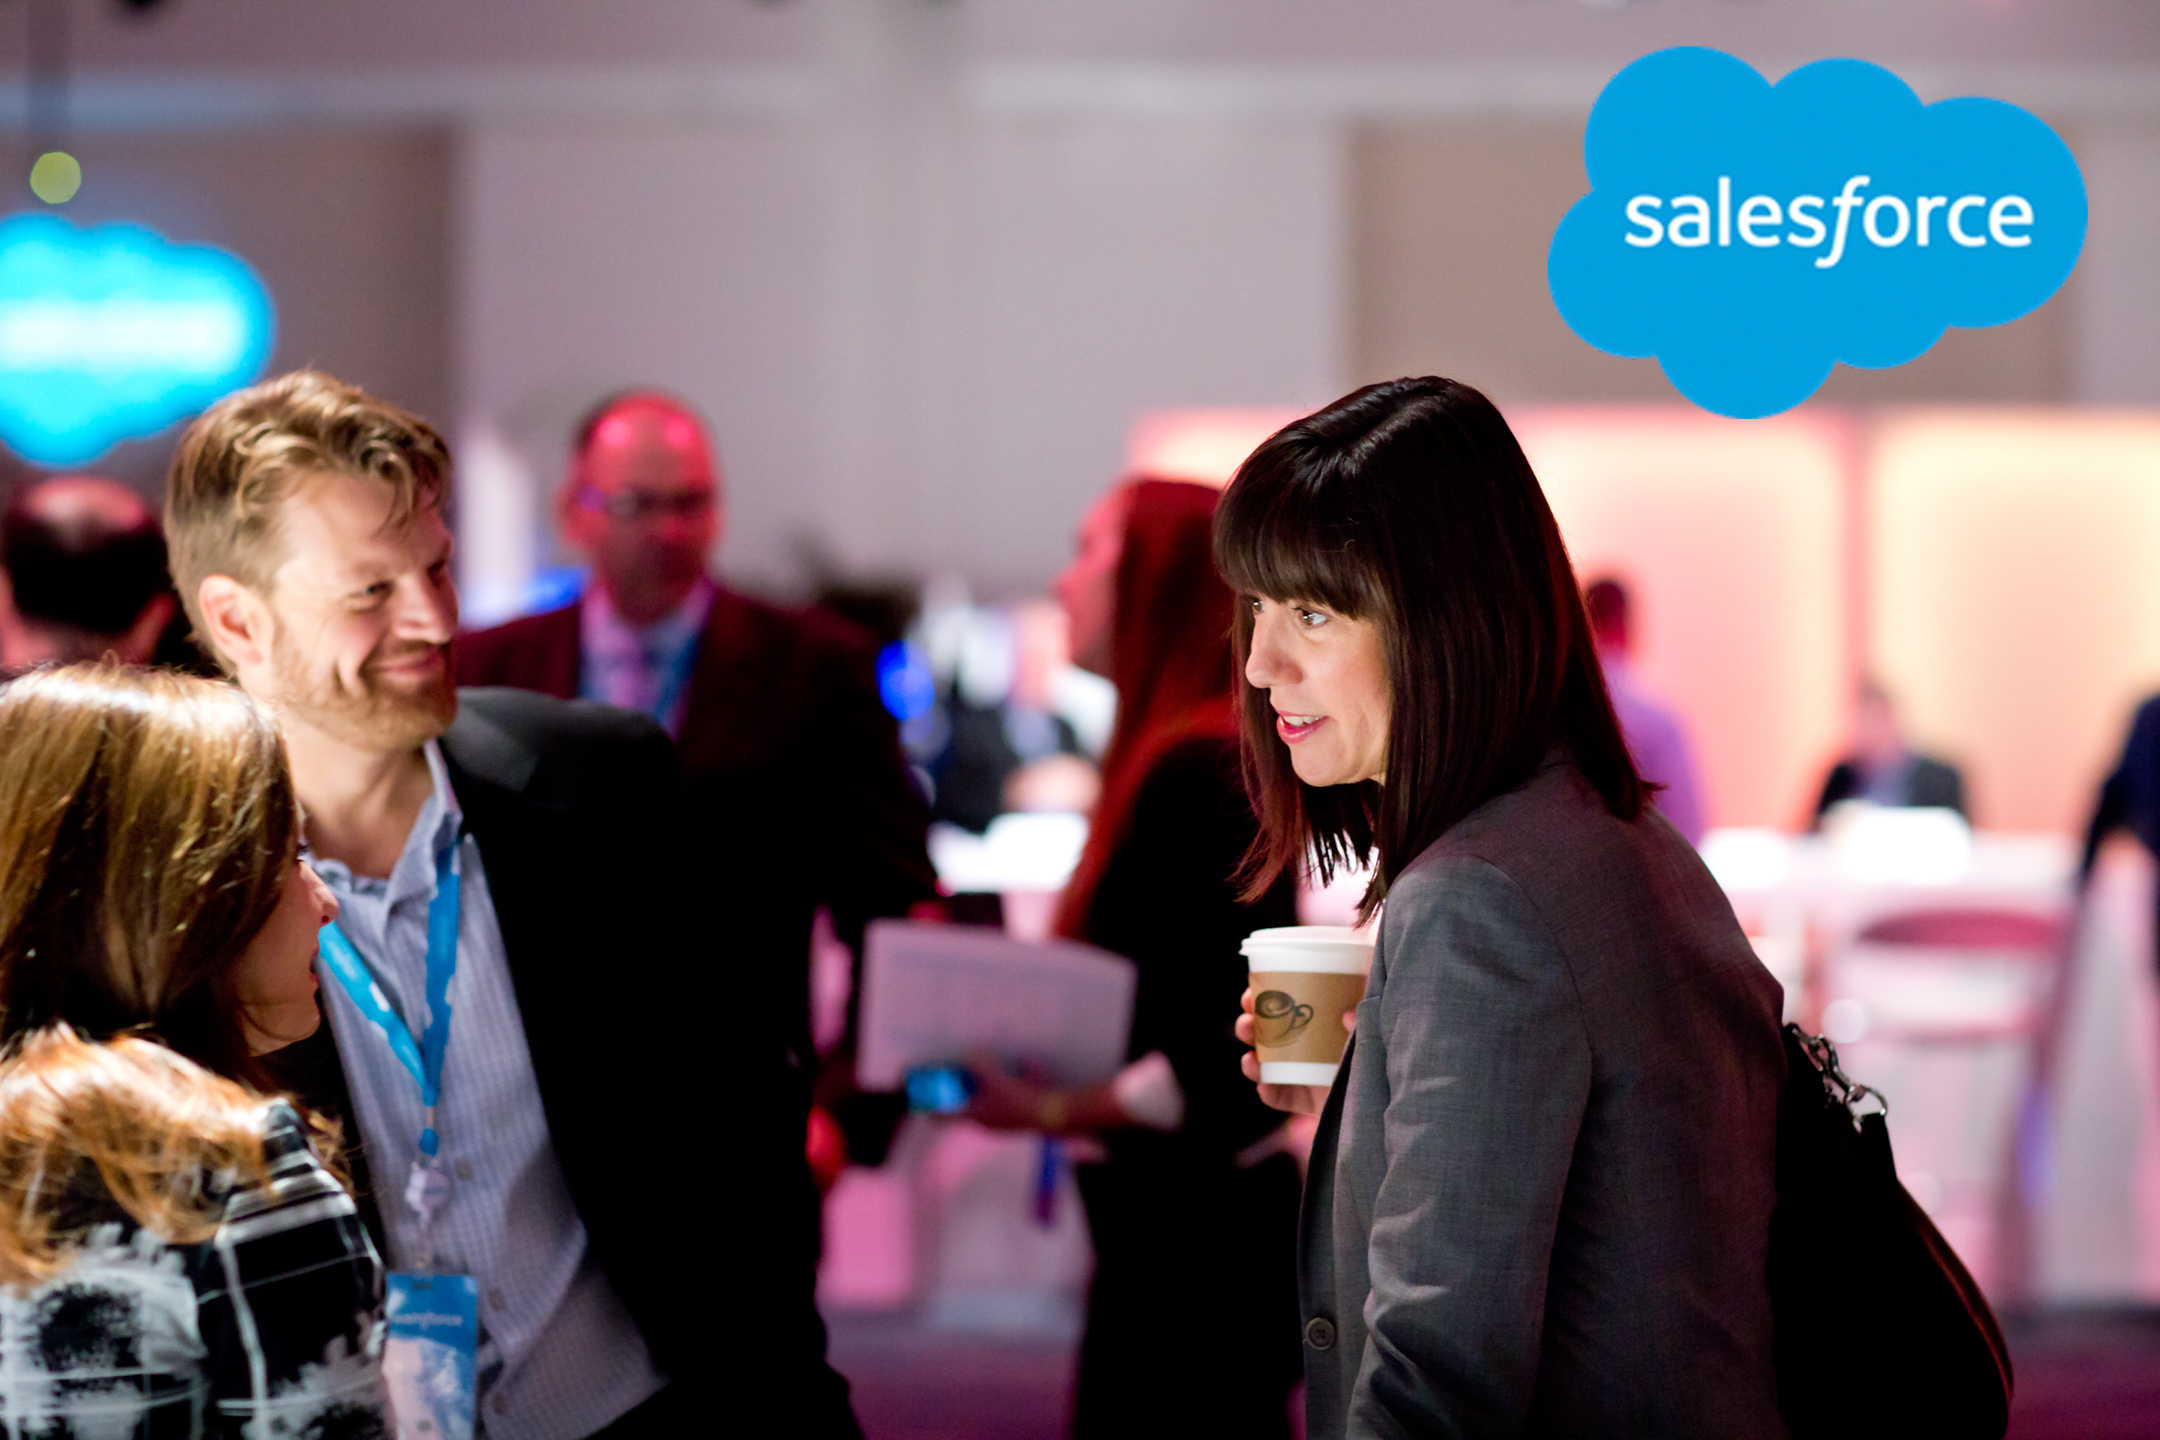 Two employees talk together for client Salesforce photographed by Lifestyle Photographer Diana Mulvihill